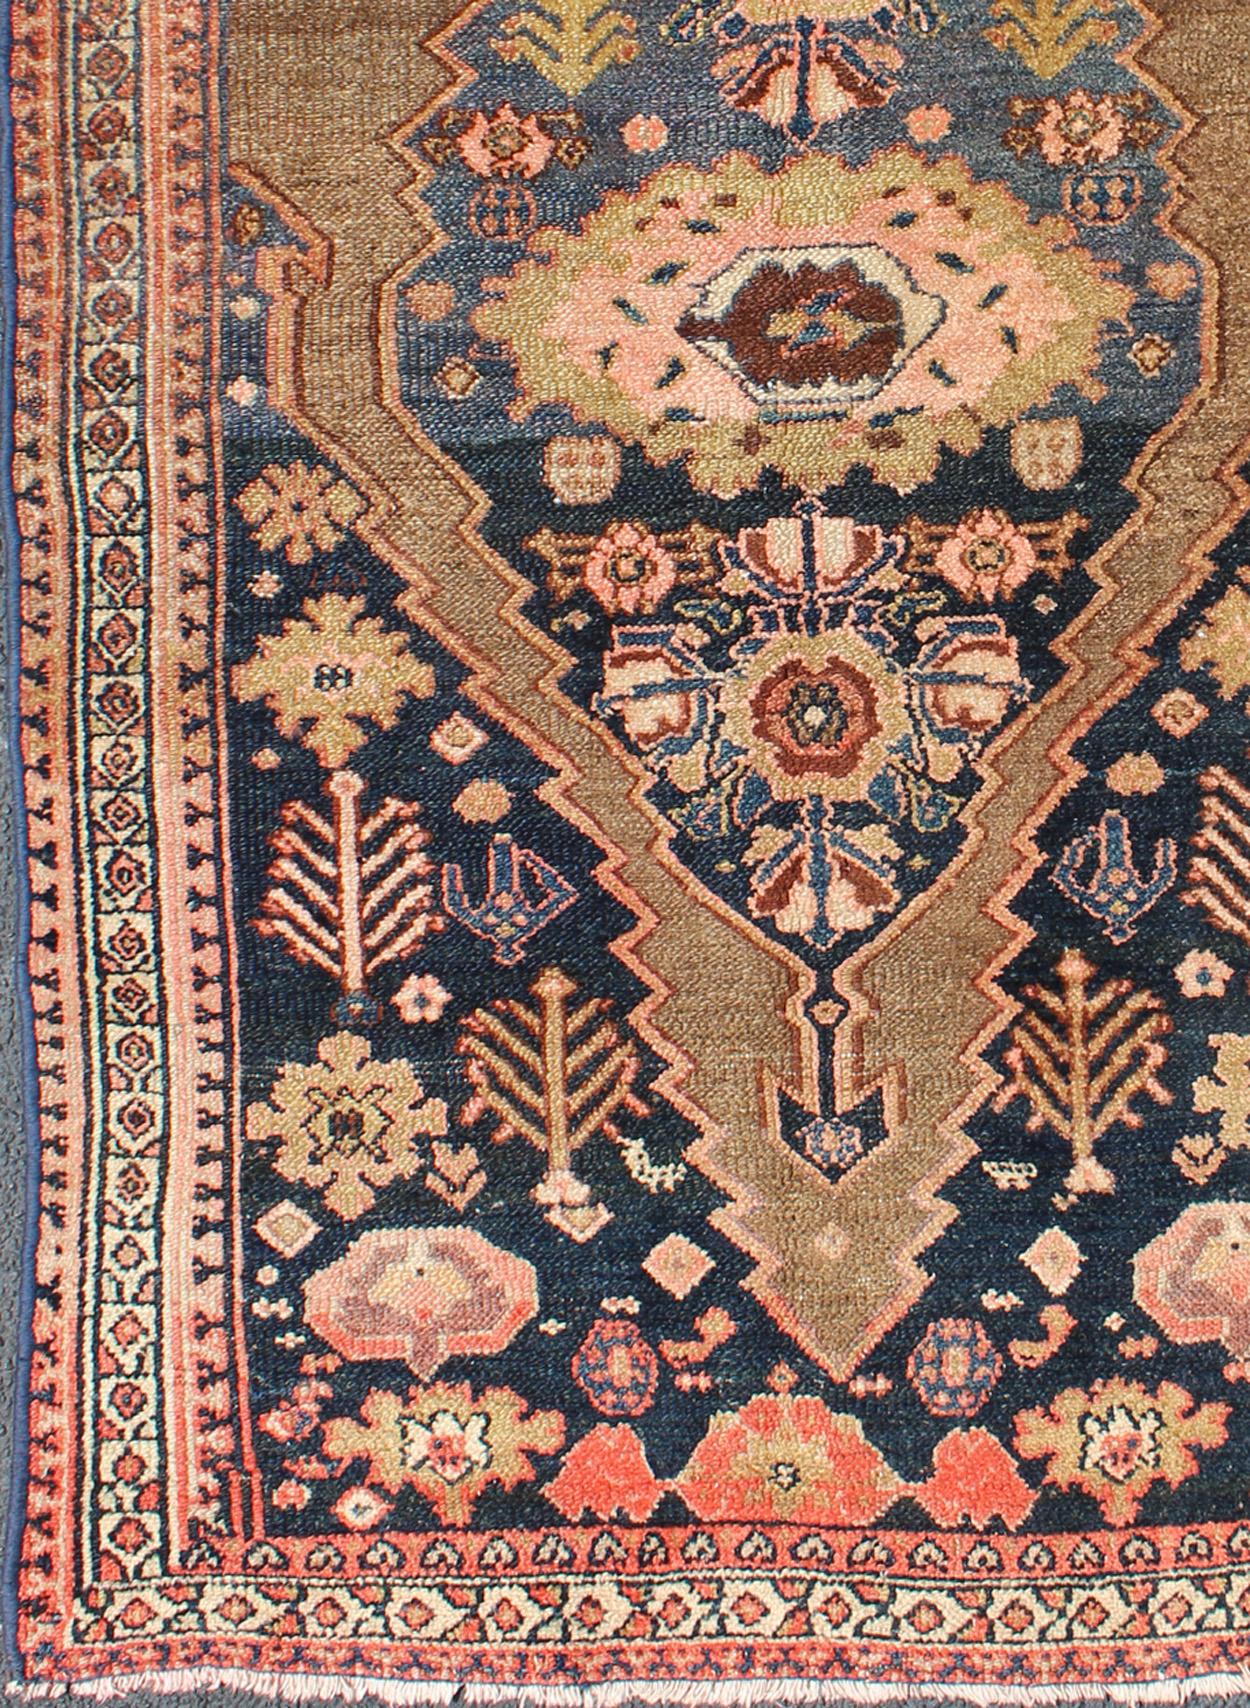 This antique Persian Serab antique rug with Medallion design in camel and shades of blue, rug zir-18, country of origin / type: Iran / Serab, circa 1900.

This handwoven, antique Persian Serab rug features a central field imbued with a stretched